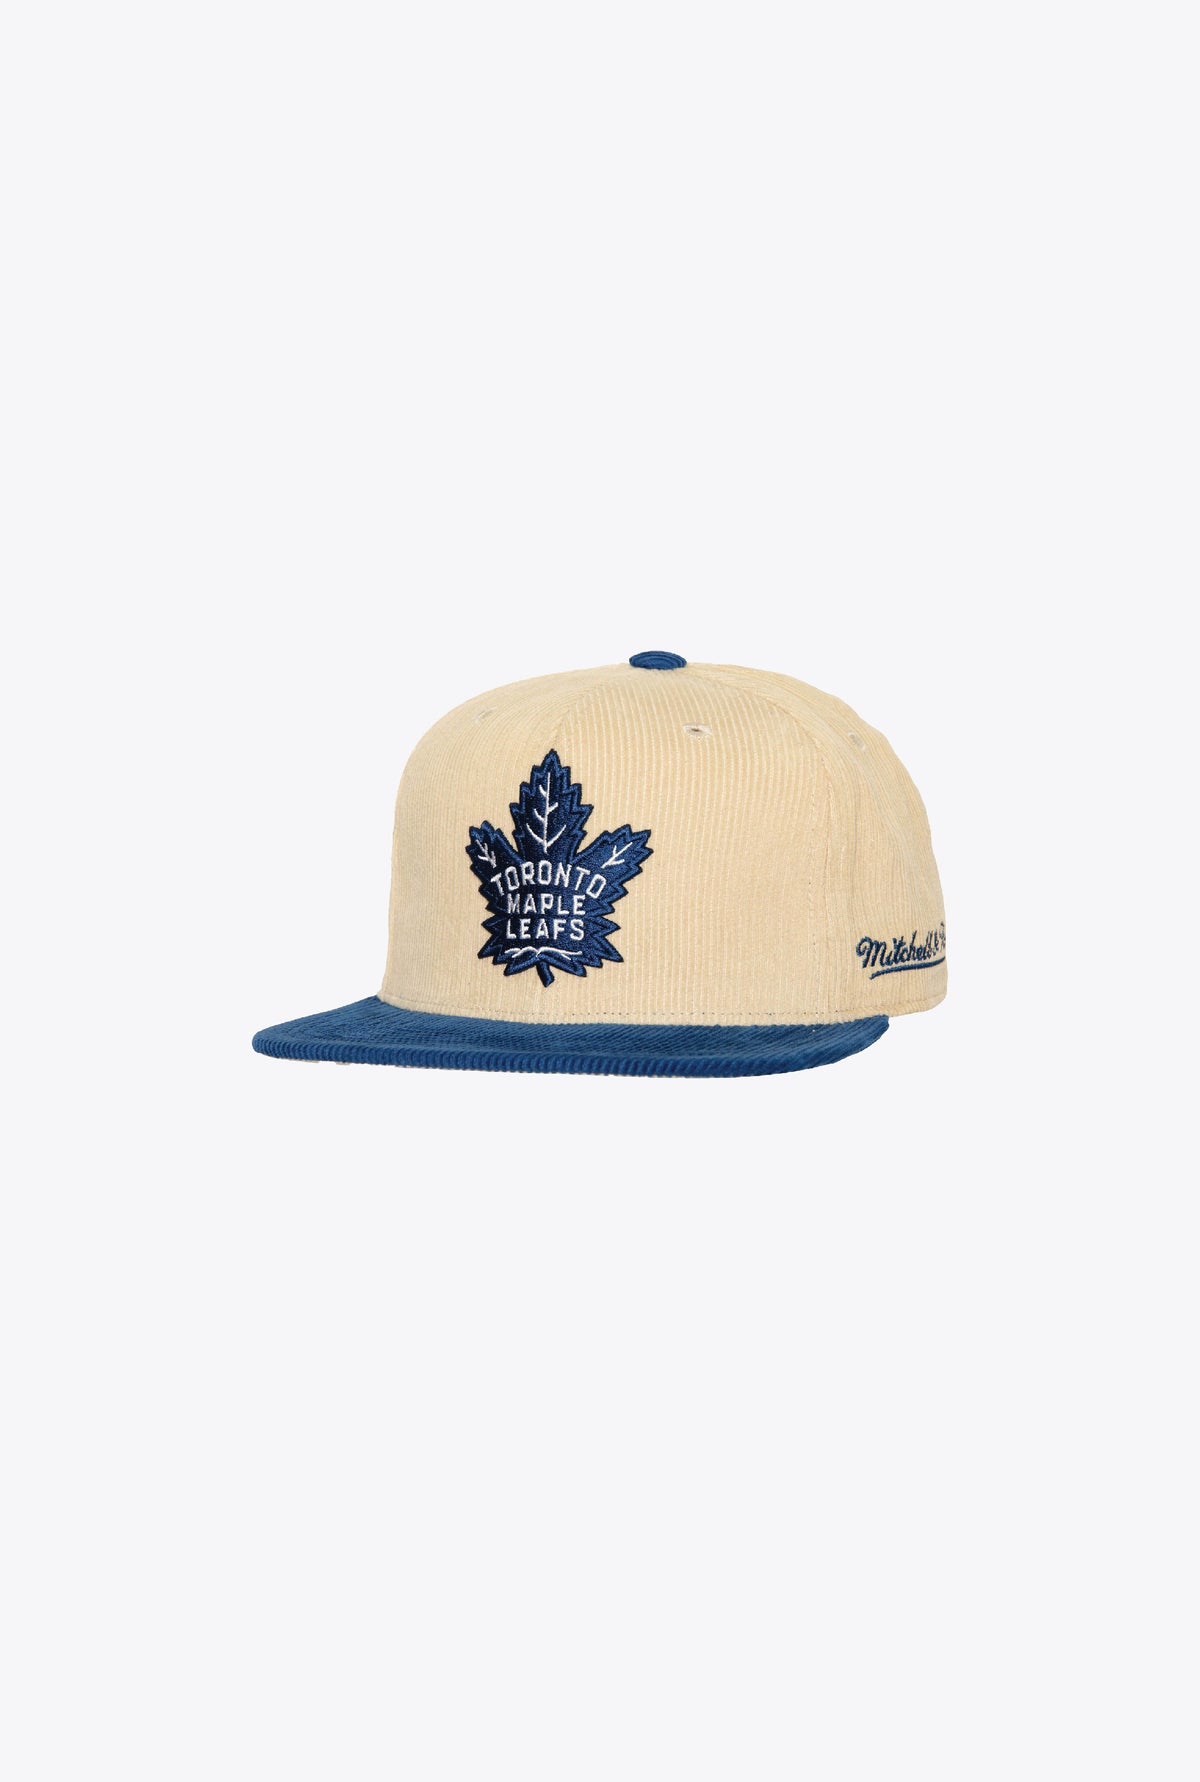 Toronto Maple Leafs 2Tone Cord Vintage Fitted Cap